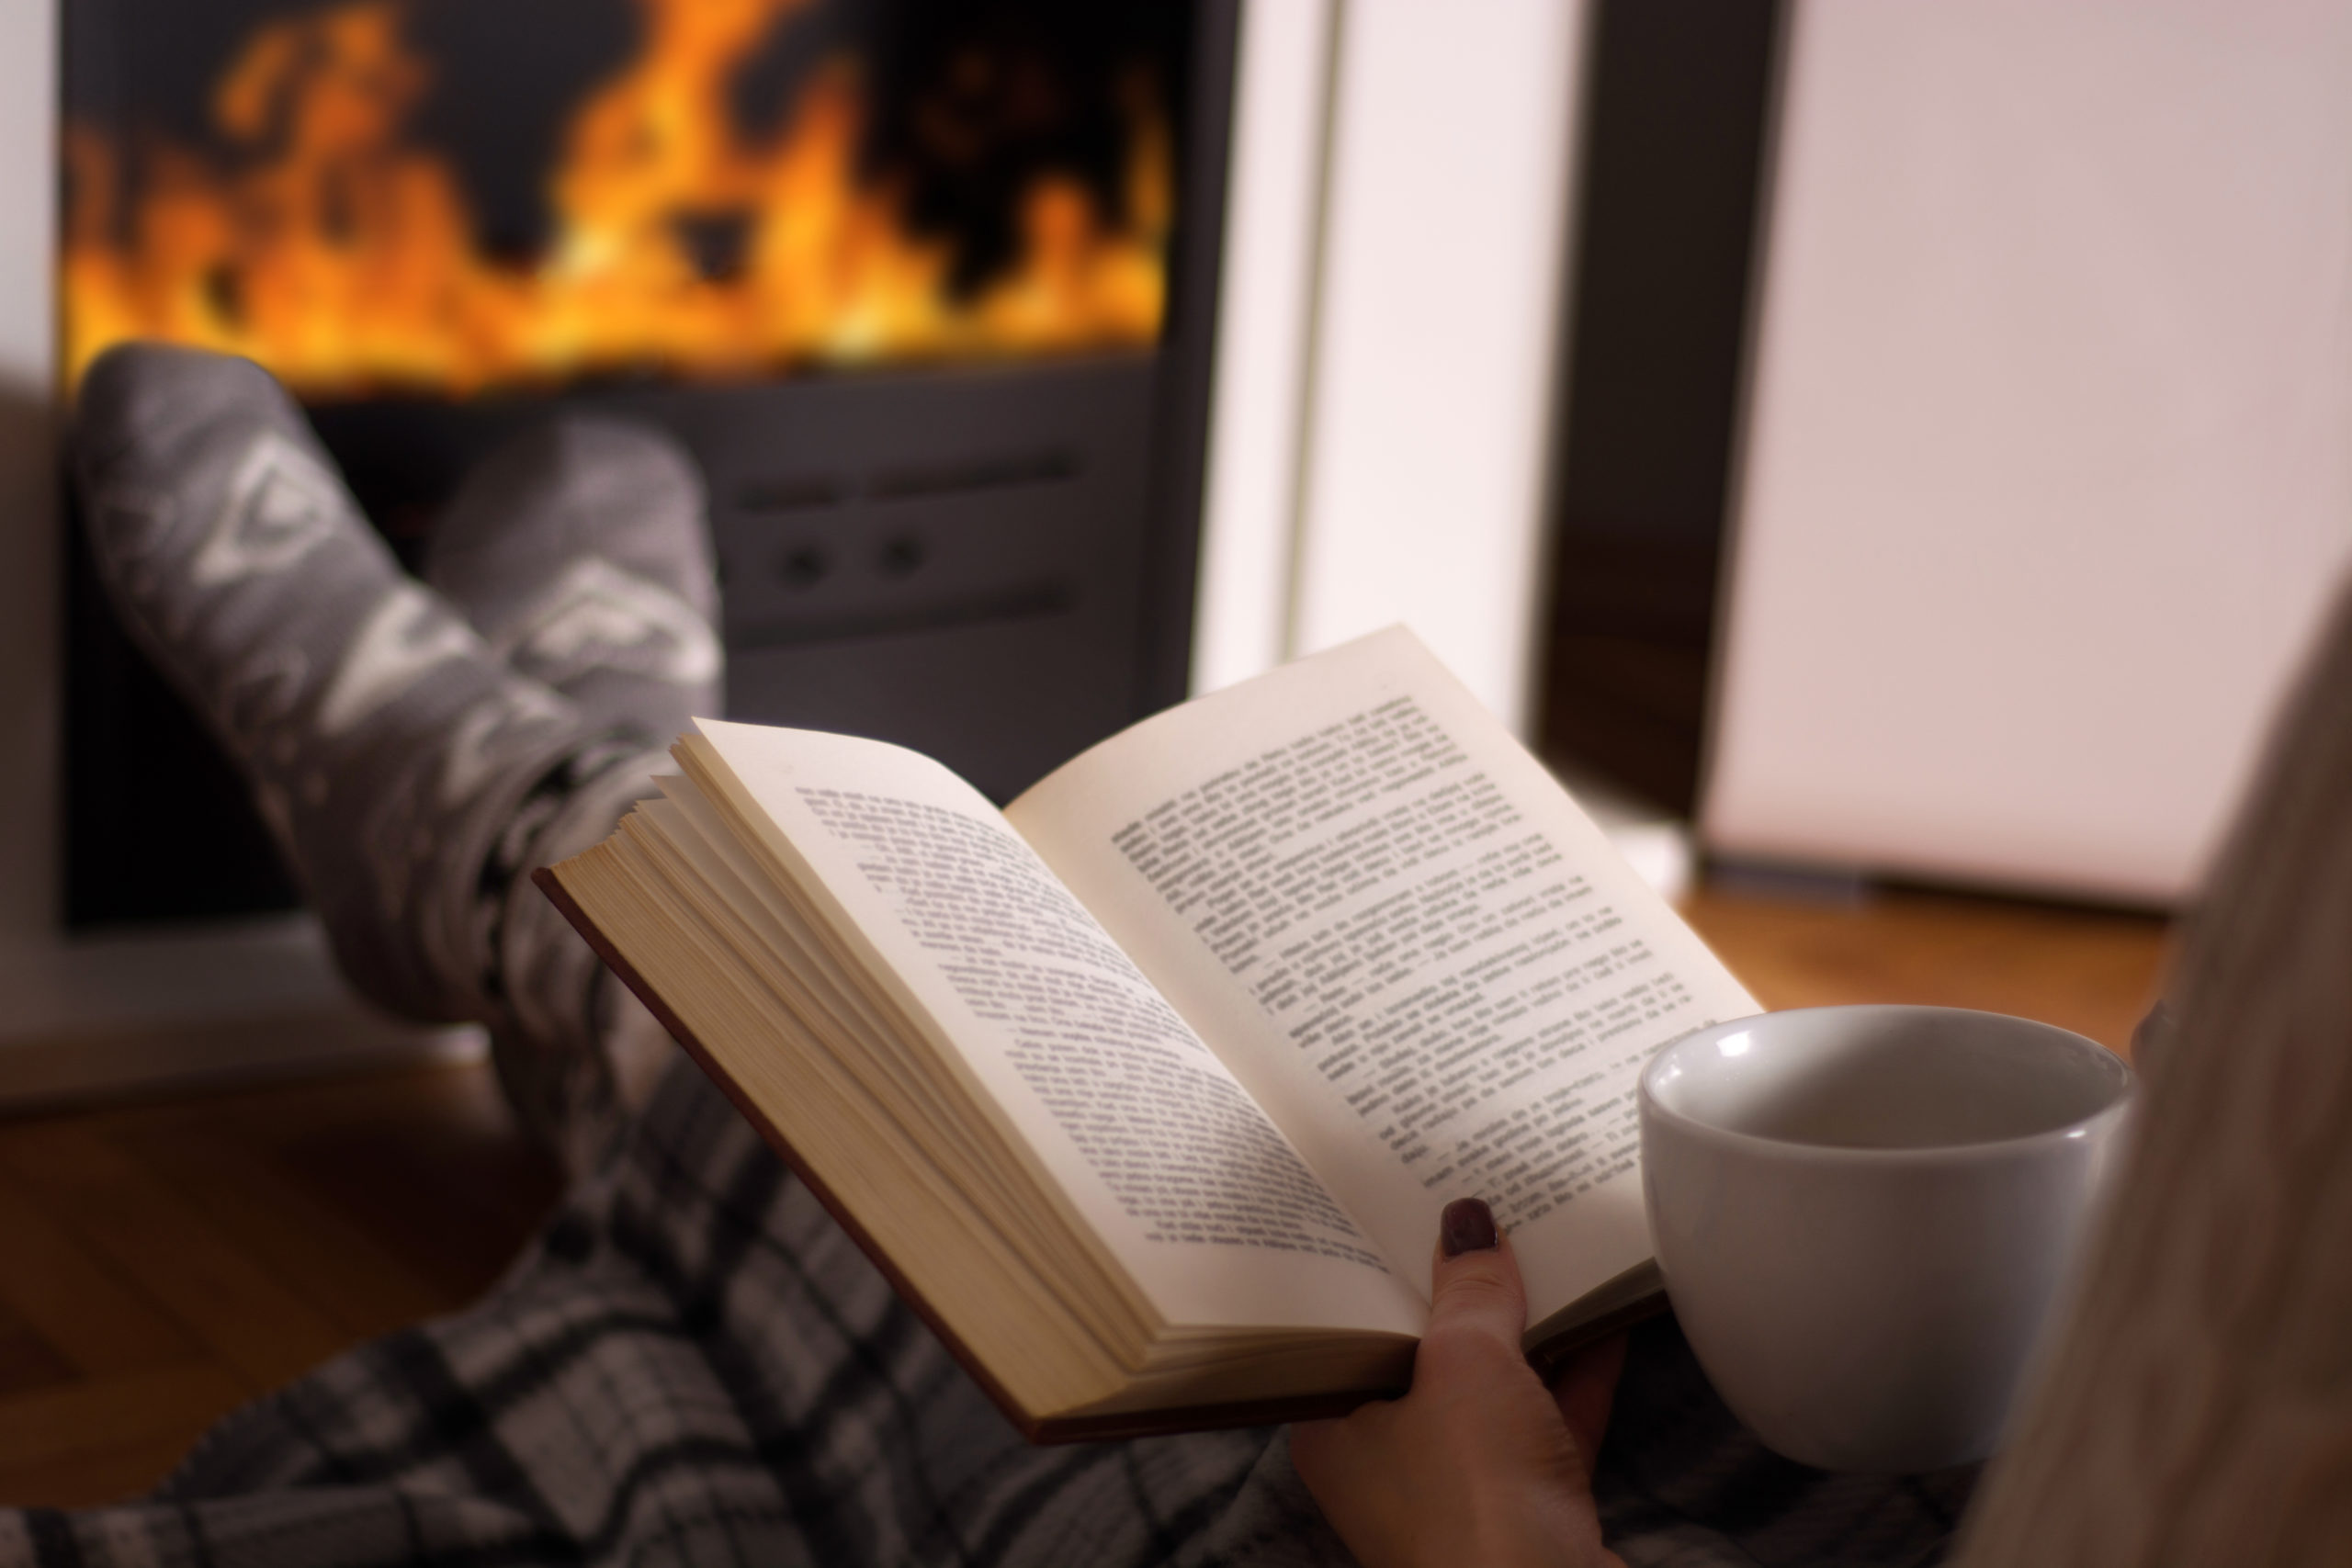 A woman is shown fro the waist down under a plaid blanket, propping her feet on an ottoman and wearing thick wooly socks. She is reading a book and holding a cup of tea while warming her feet in front of the fireplace at home.